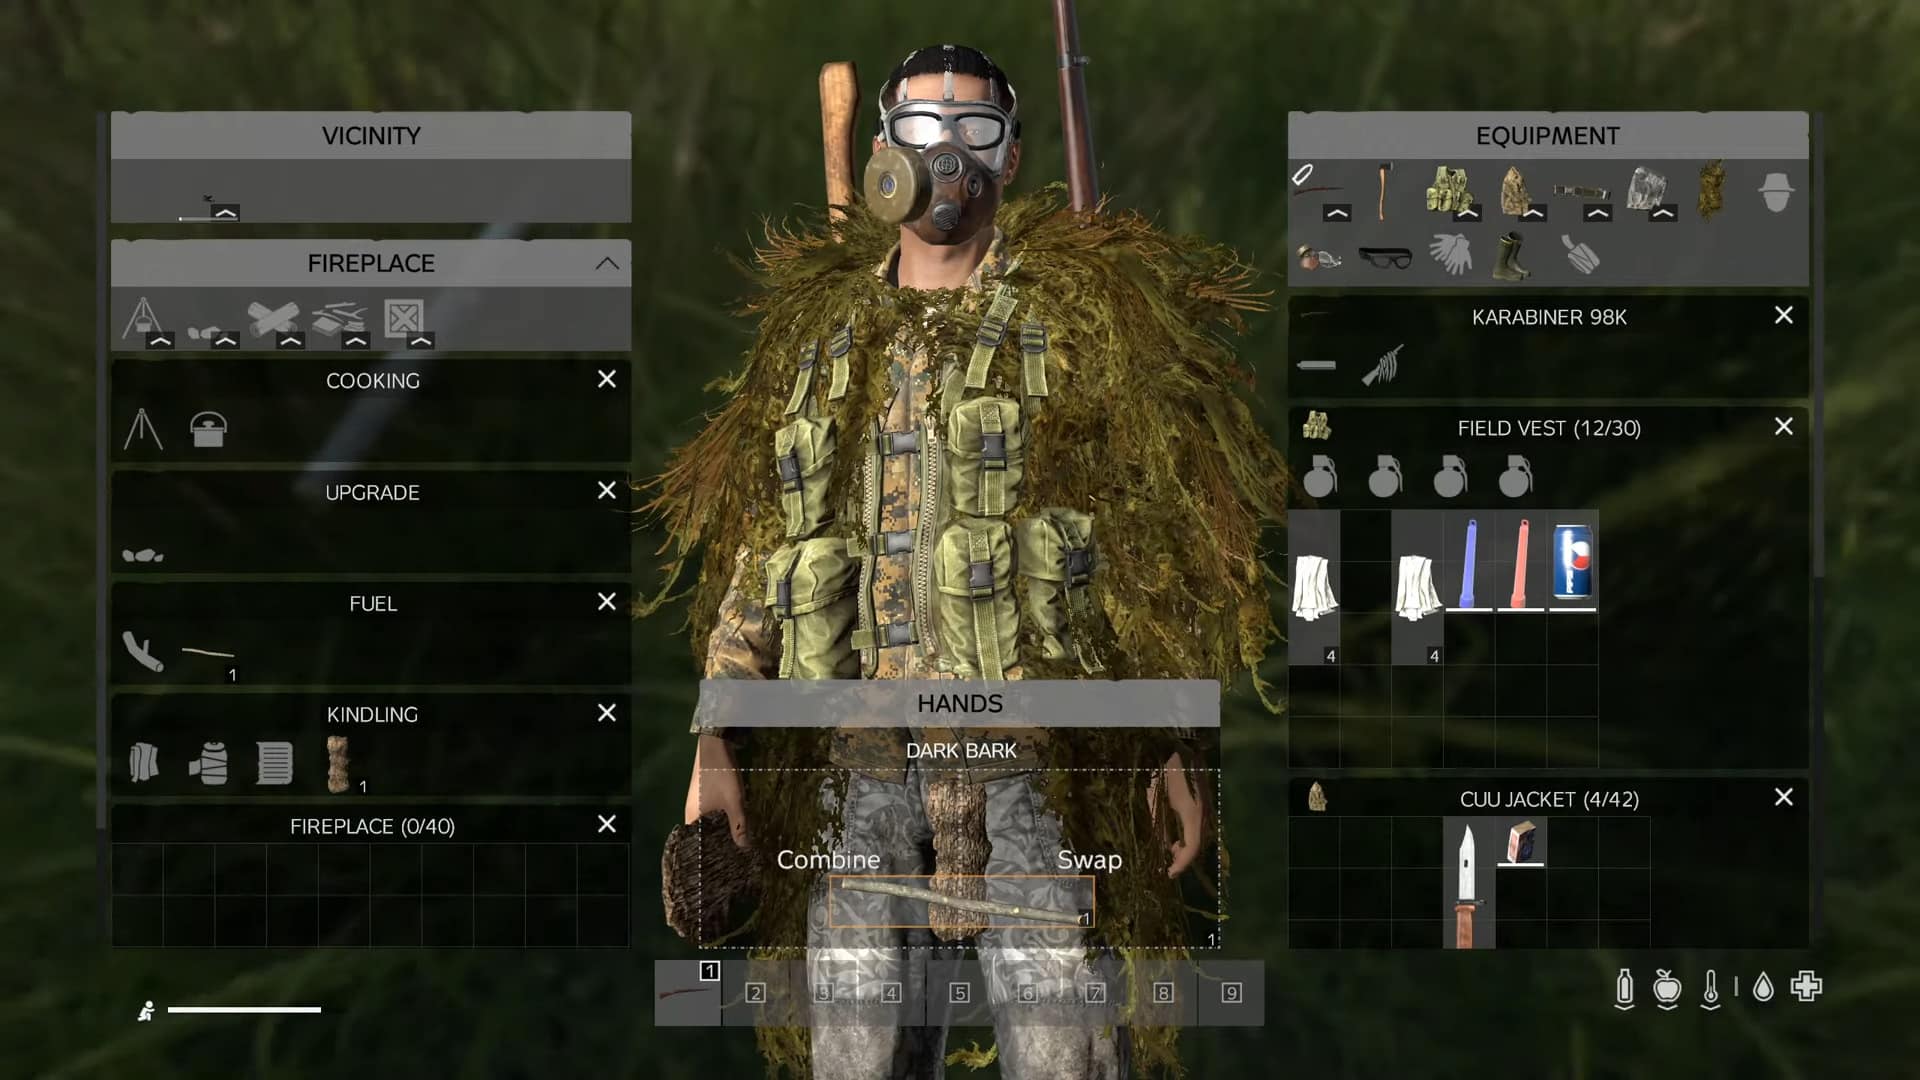 Combing sticks and bark in DayZ inventory